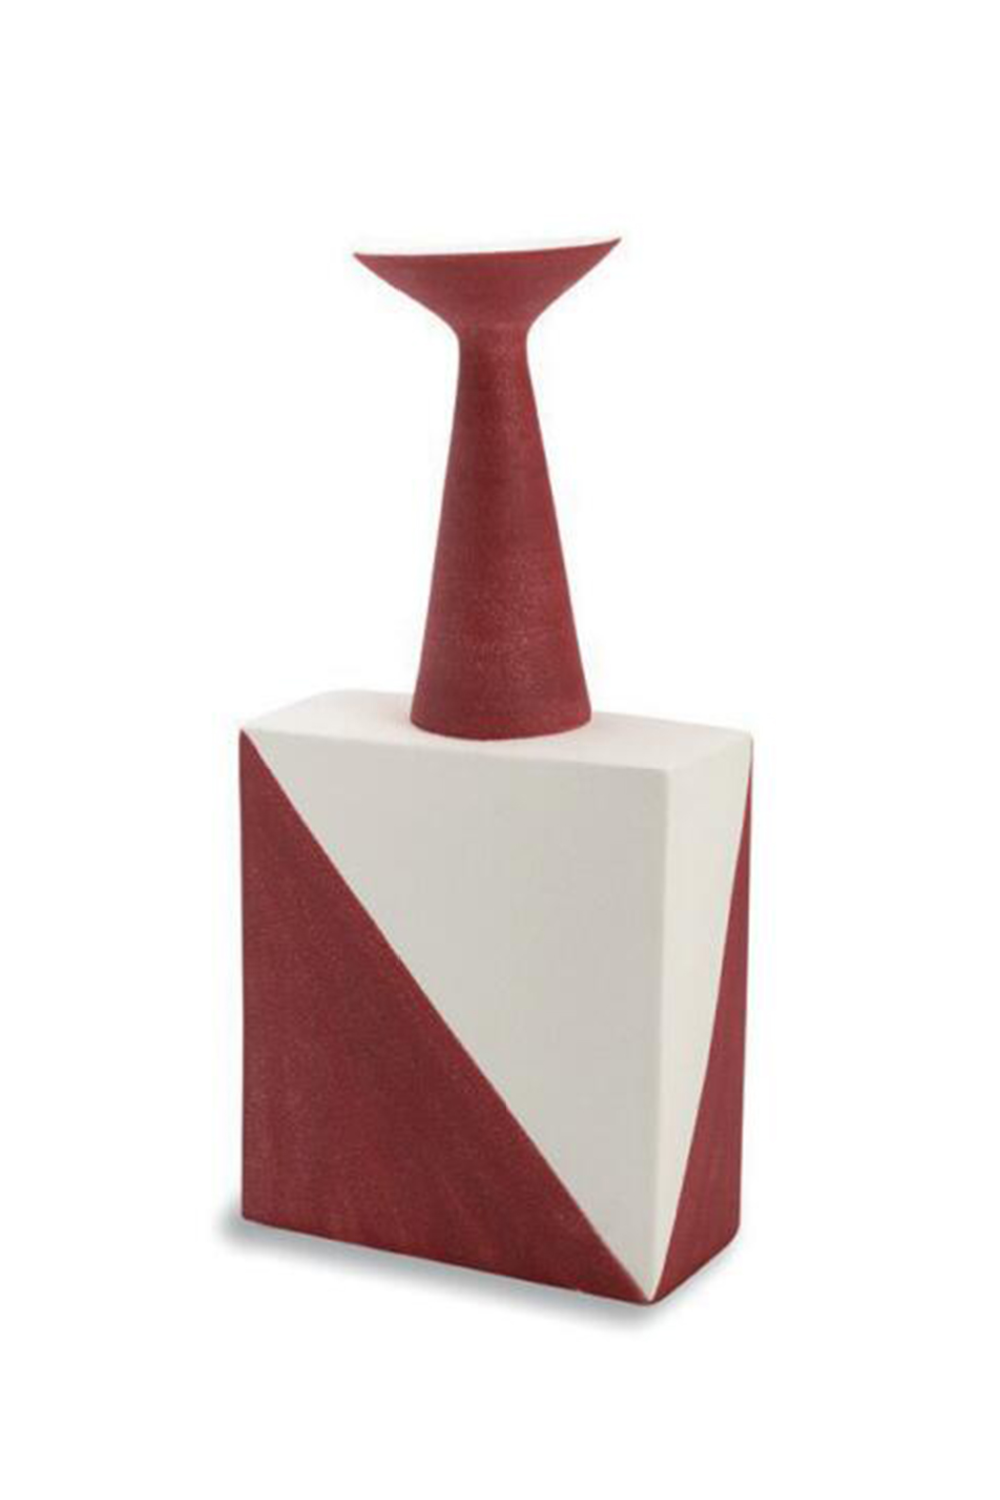 Red And White Ceramic Cubist Vase | Liang & Eimil Pica I | OROA.com